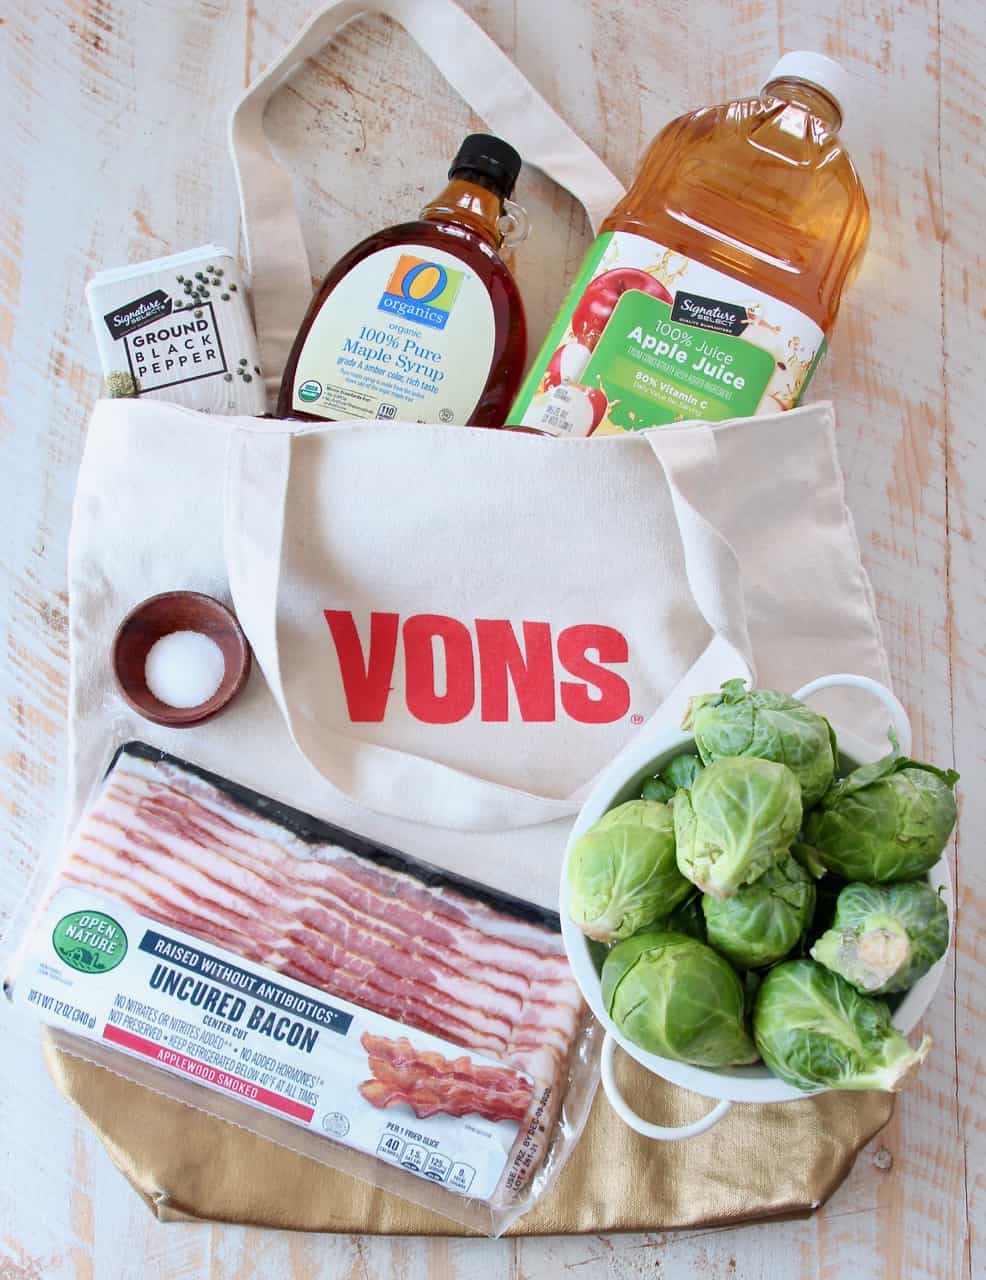 Ingredients for maple bacon brussel sprouts in Vons canvas bag